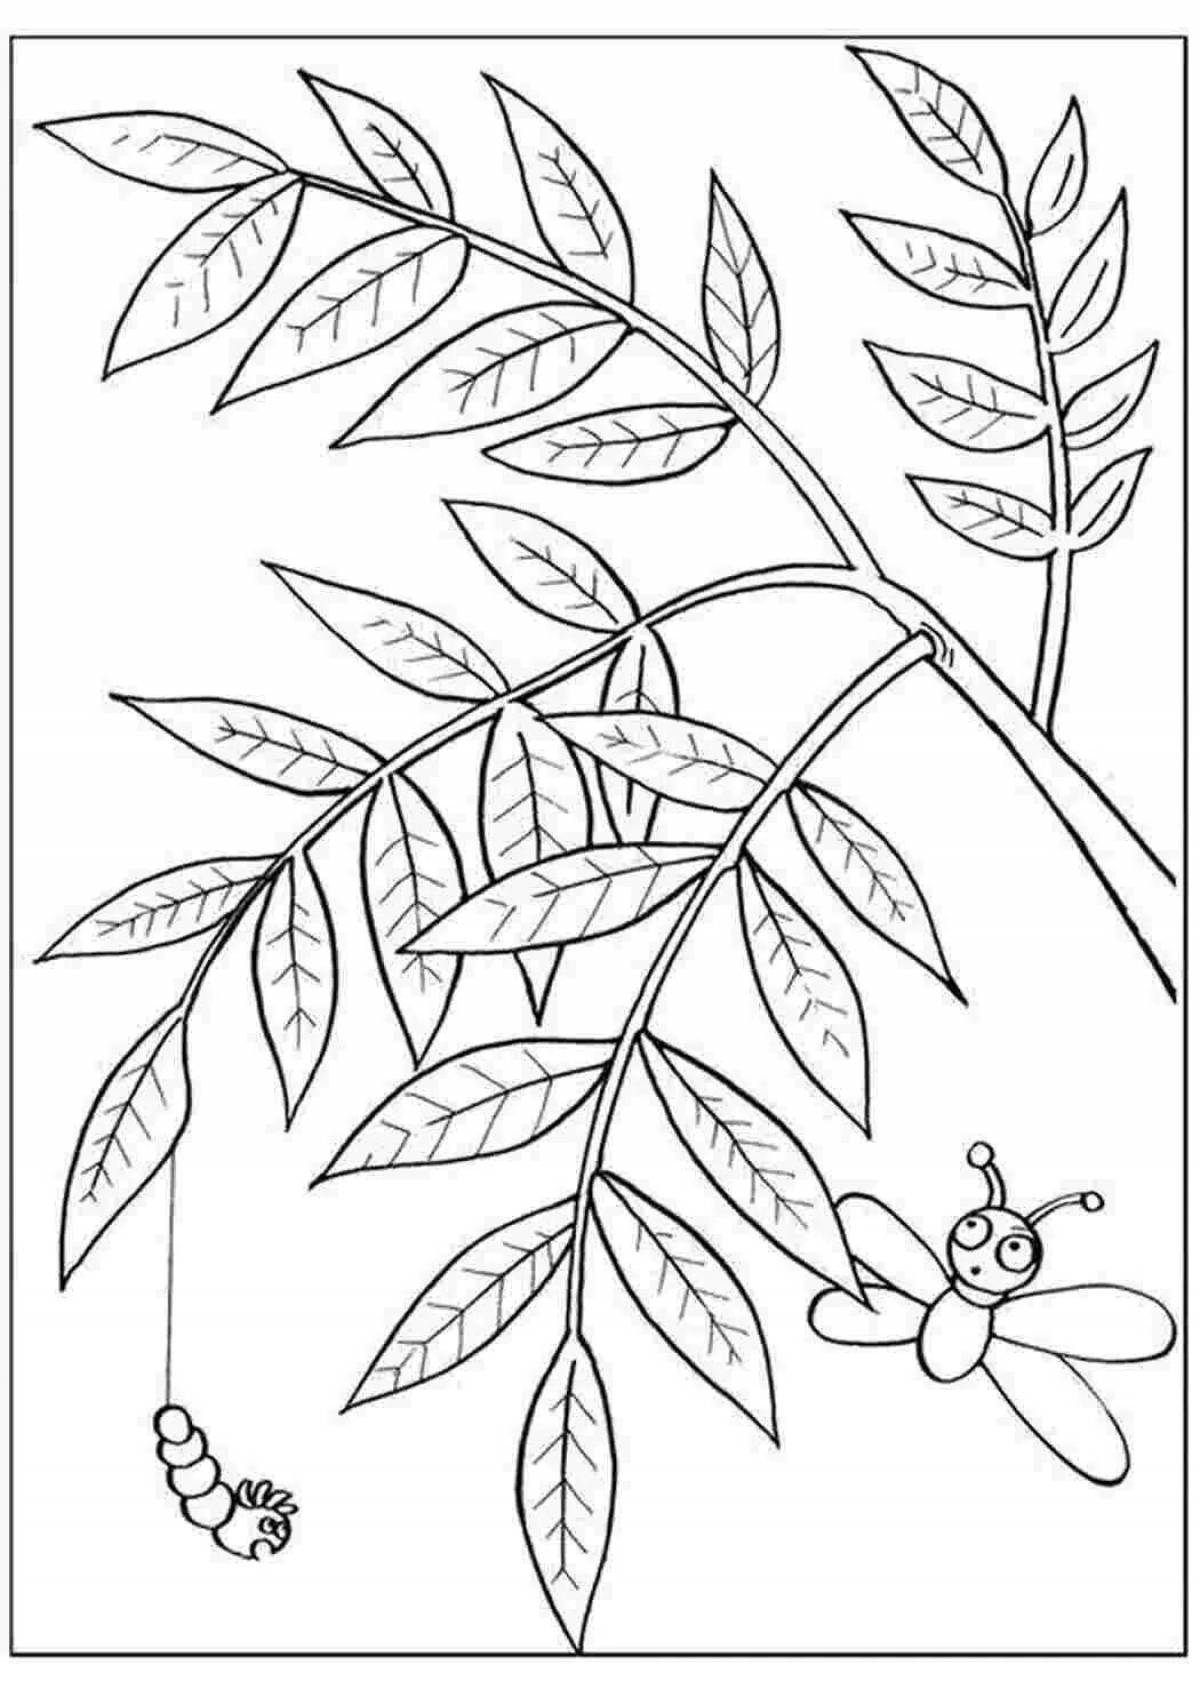 Attractive rowan leaf coloring page